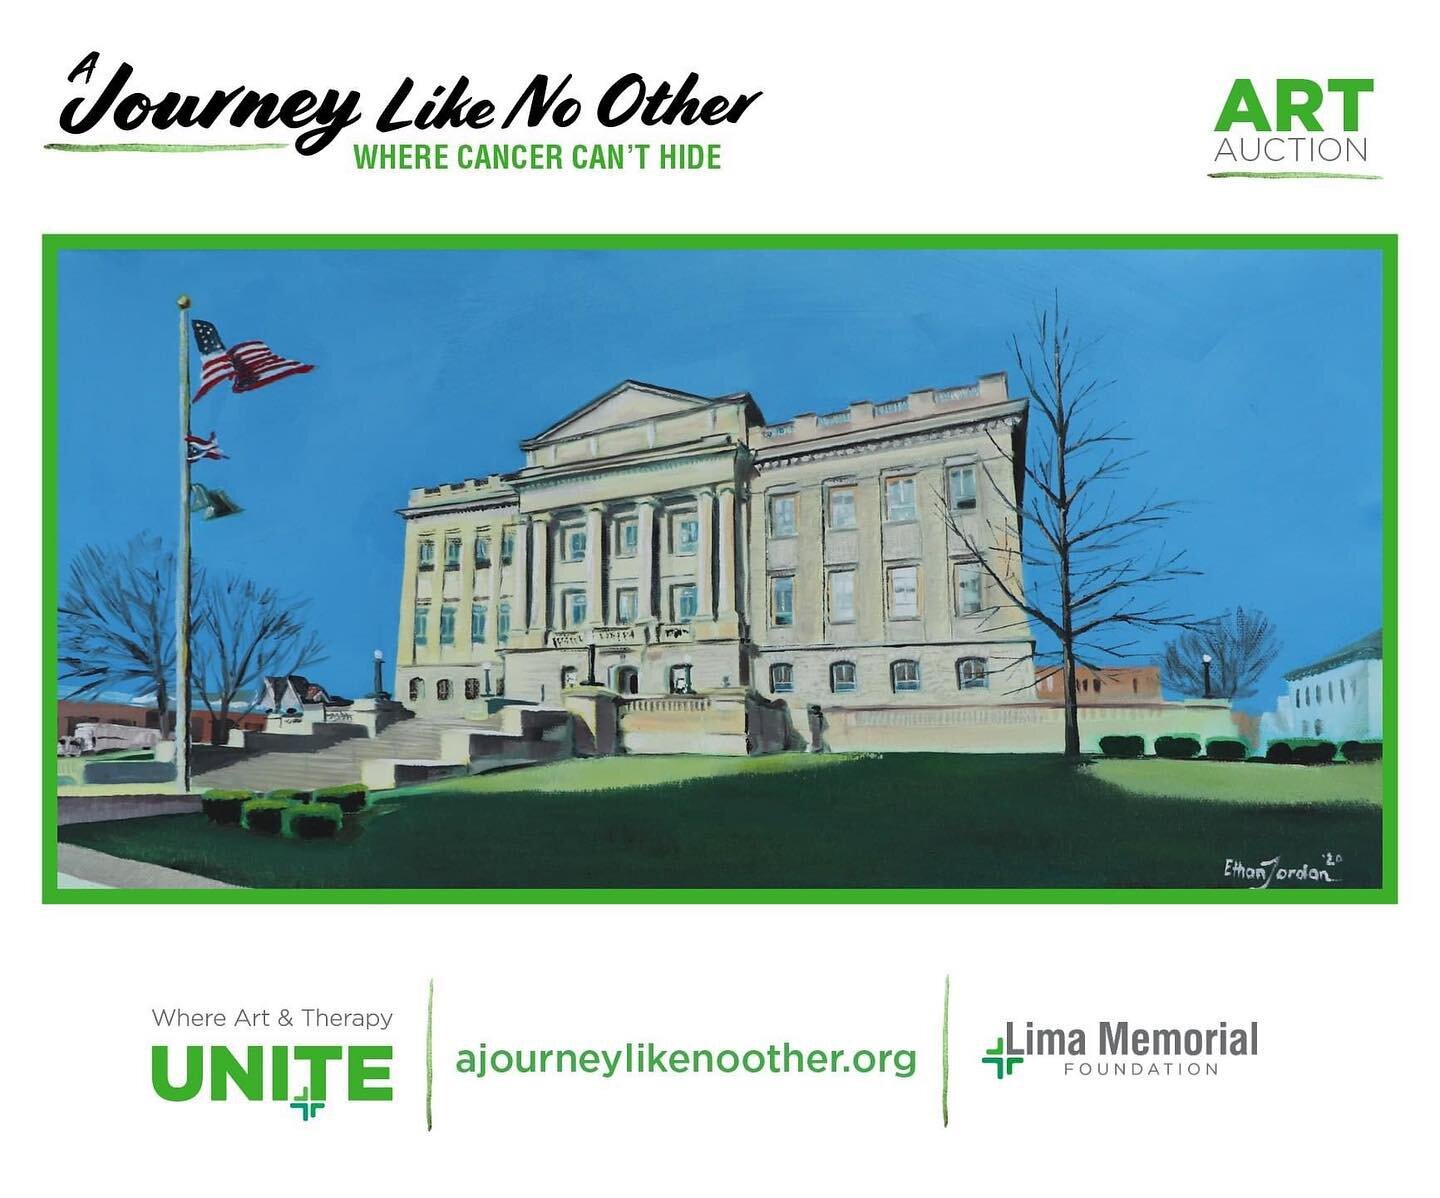 Hardin County Courthouse

Placed on the National Register of Historic Places, the stately Hardin County Courthouse stands proudly in downtown Kenton. This exquisite oil painting of the courthouse by artist Ethan Jordan, captures the intricate detail 